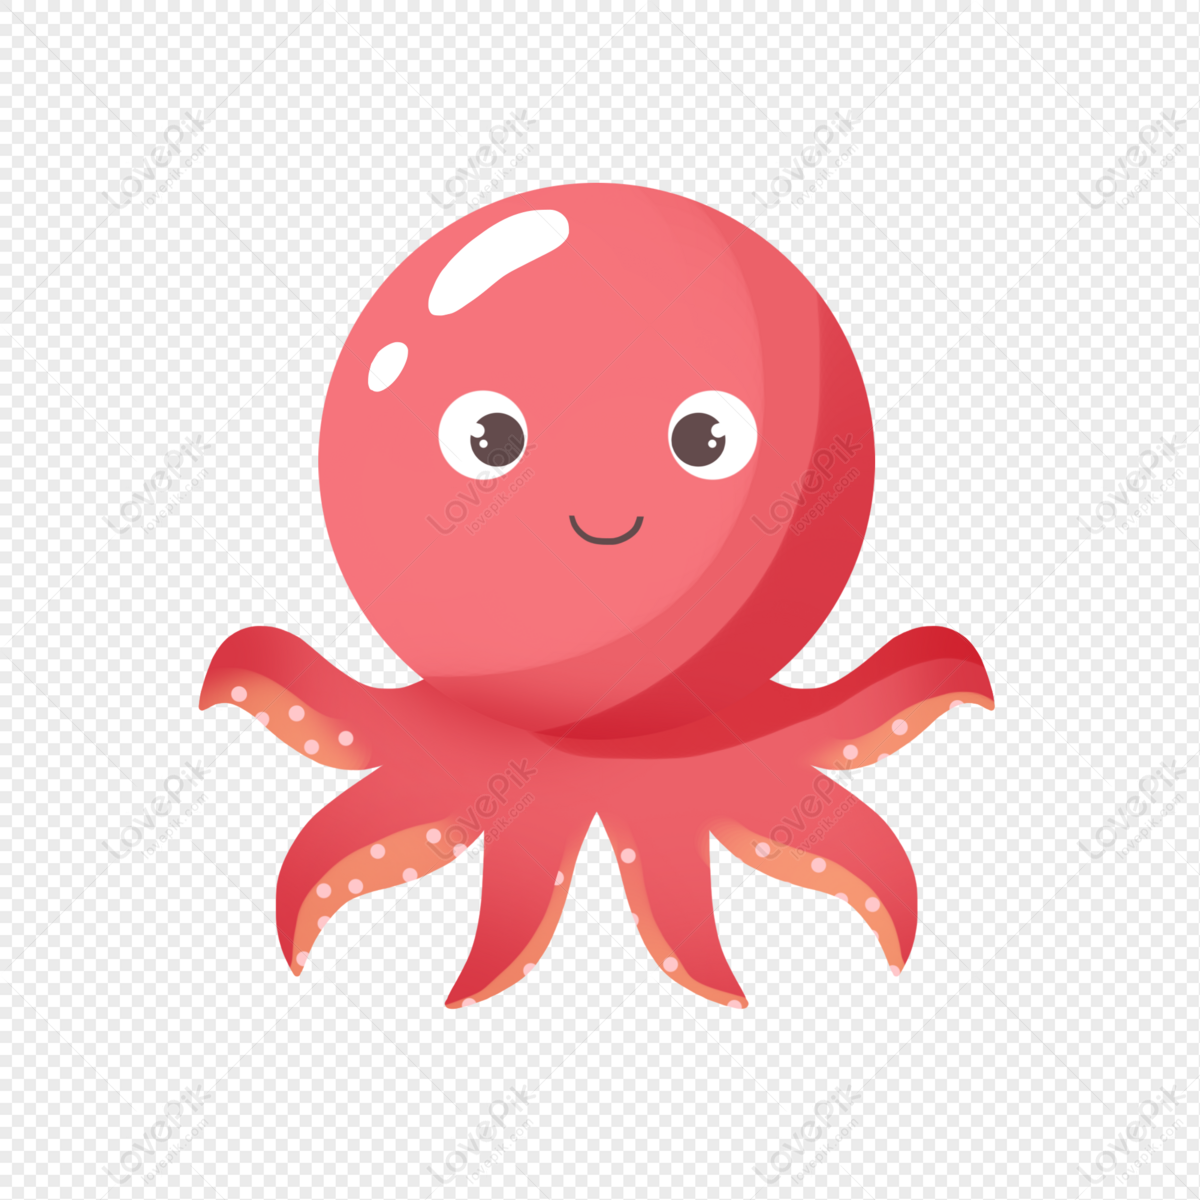 Hand Drawn Cartoon Red Octopus Free PNG And Clipart Image For Free Download  - Lovepik | 401308269